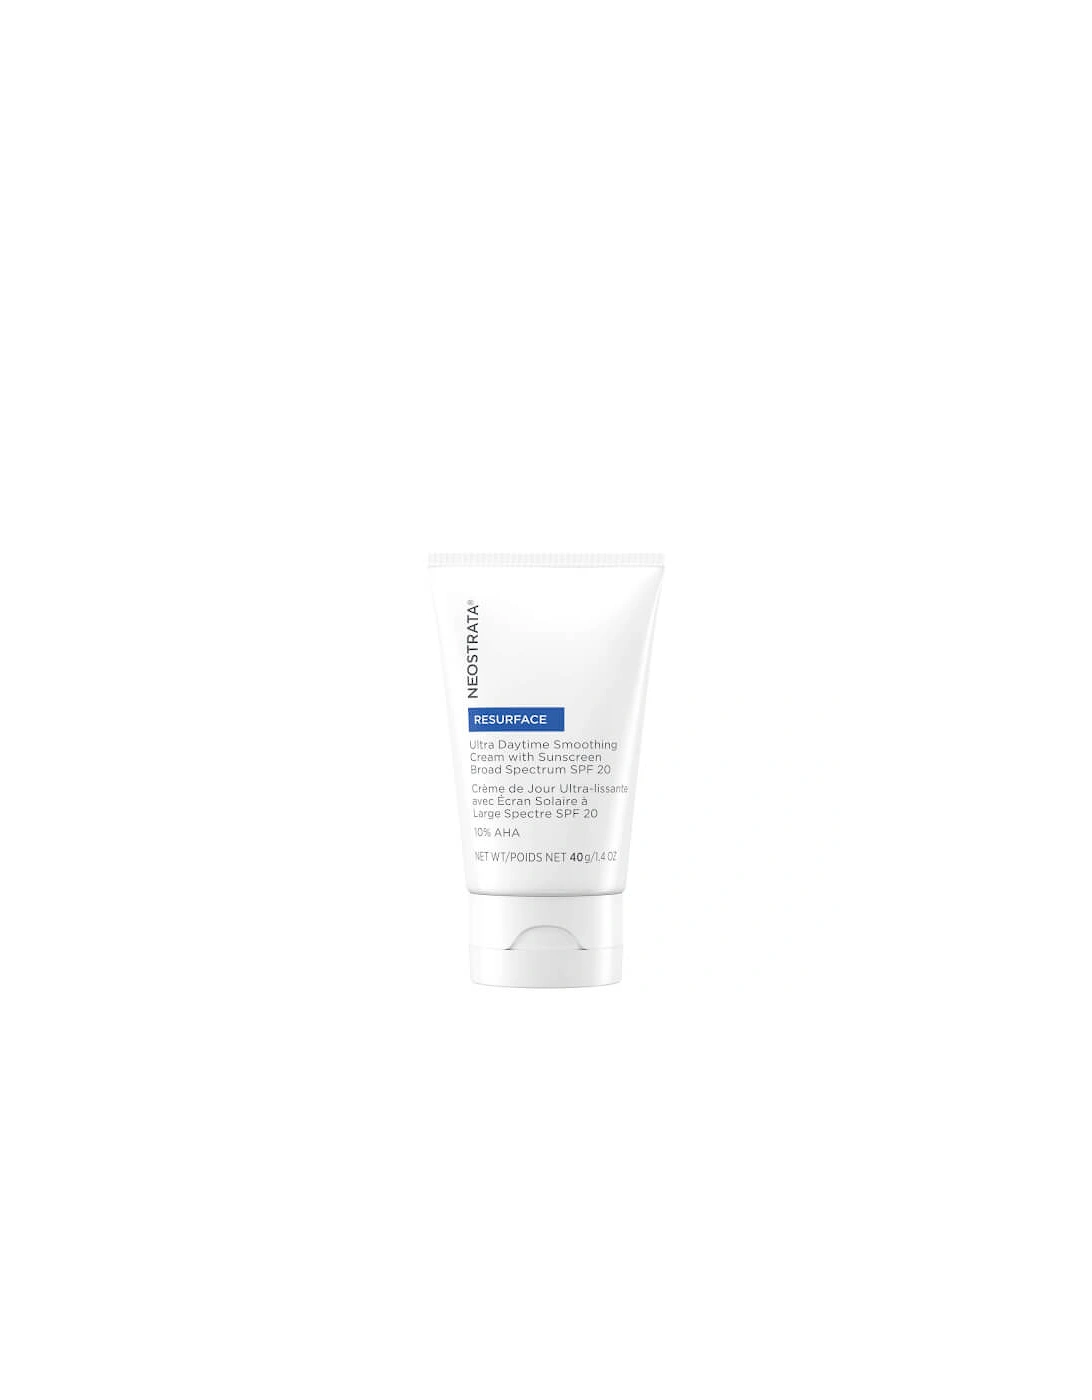 Resurface Ultra Daytime Smoothing Cream for Face with SPF 20 40g, 2 of 1